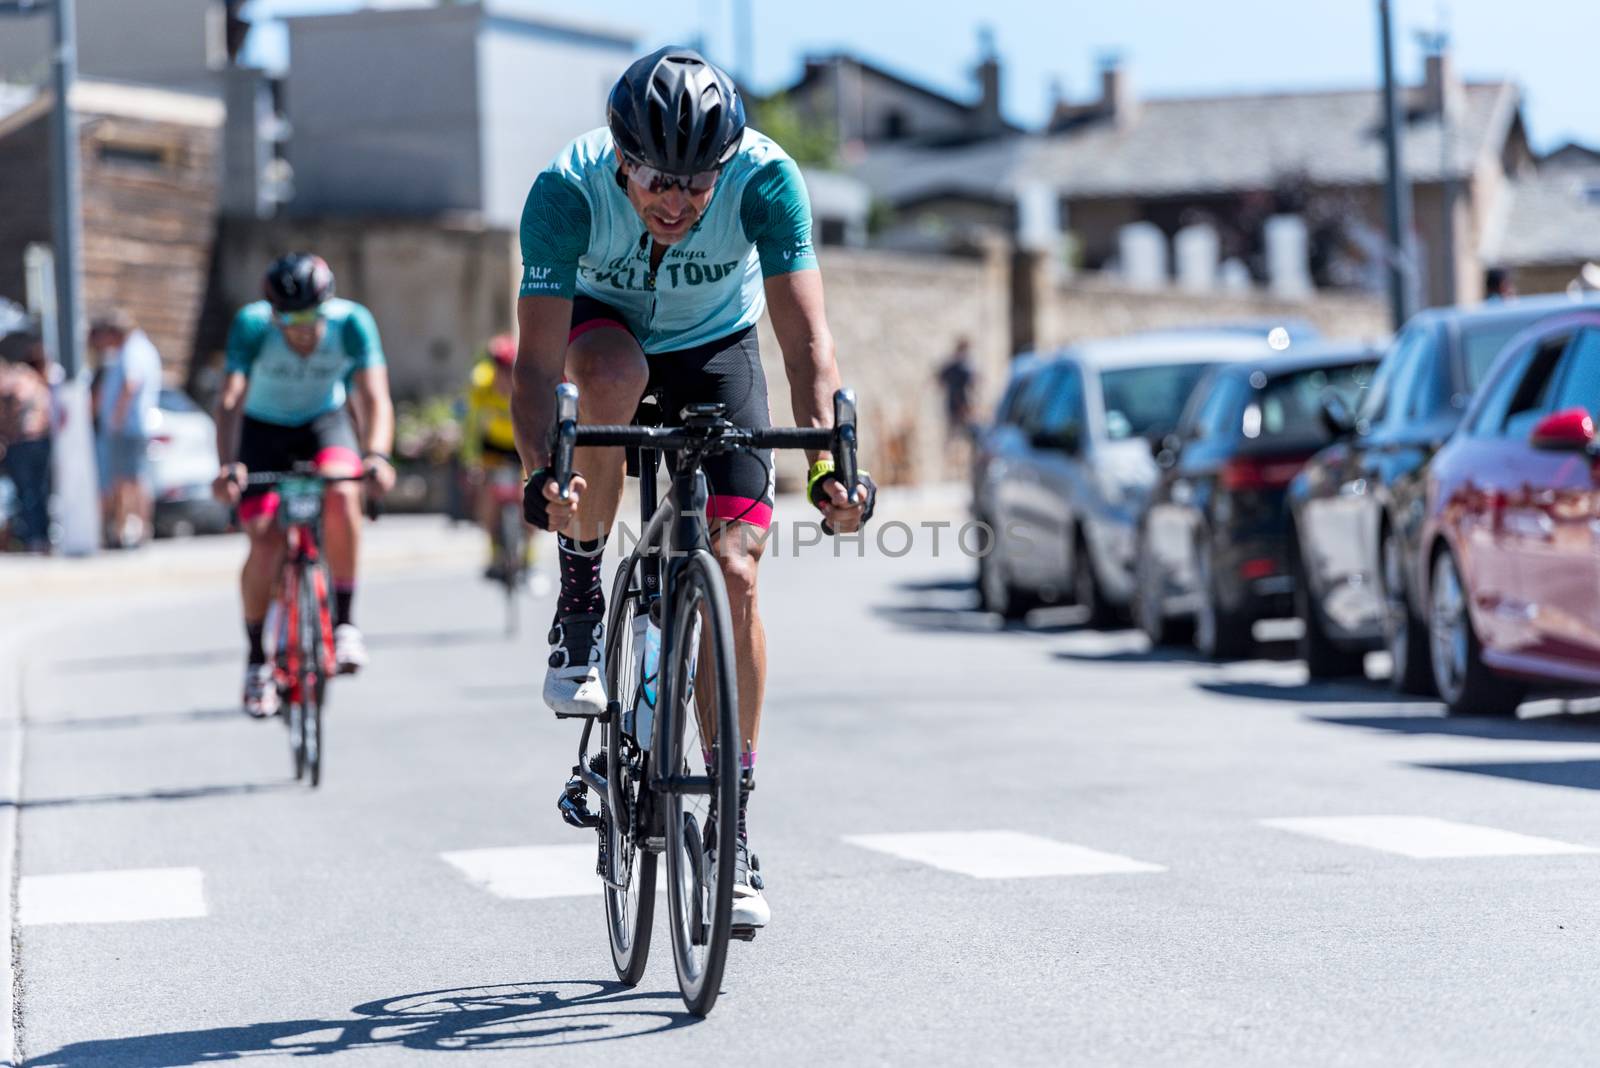 Cyclists in Amateur Race La Cerdanya Cycle Tour 2020 in Les Angl by martinscphoto